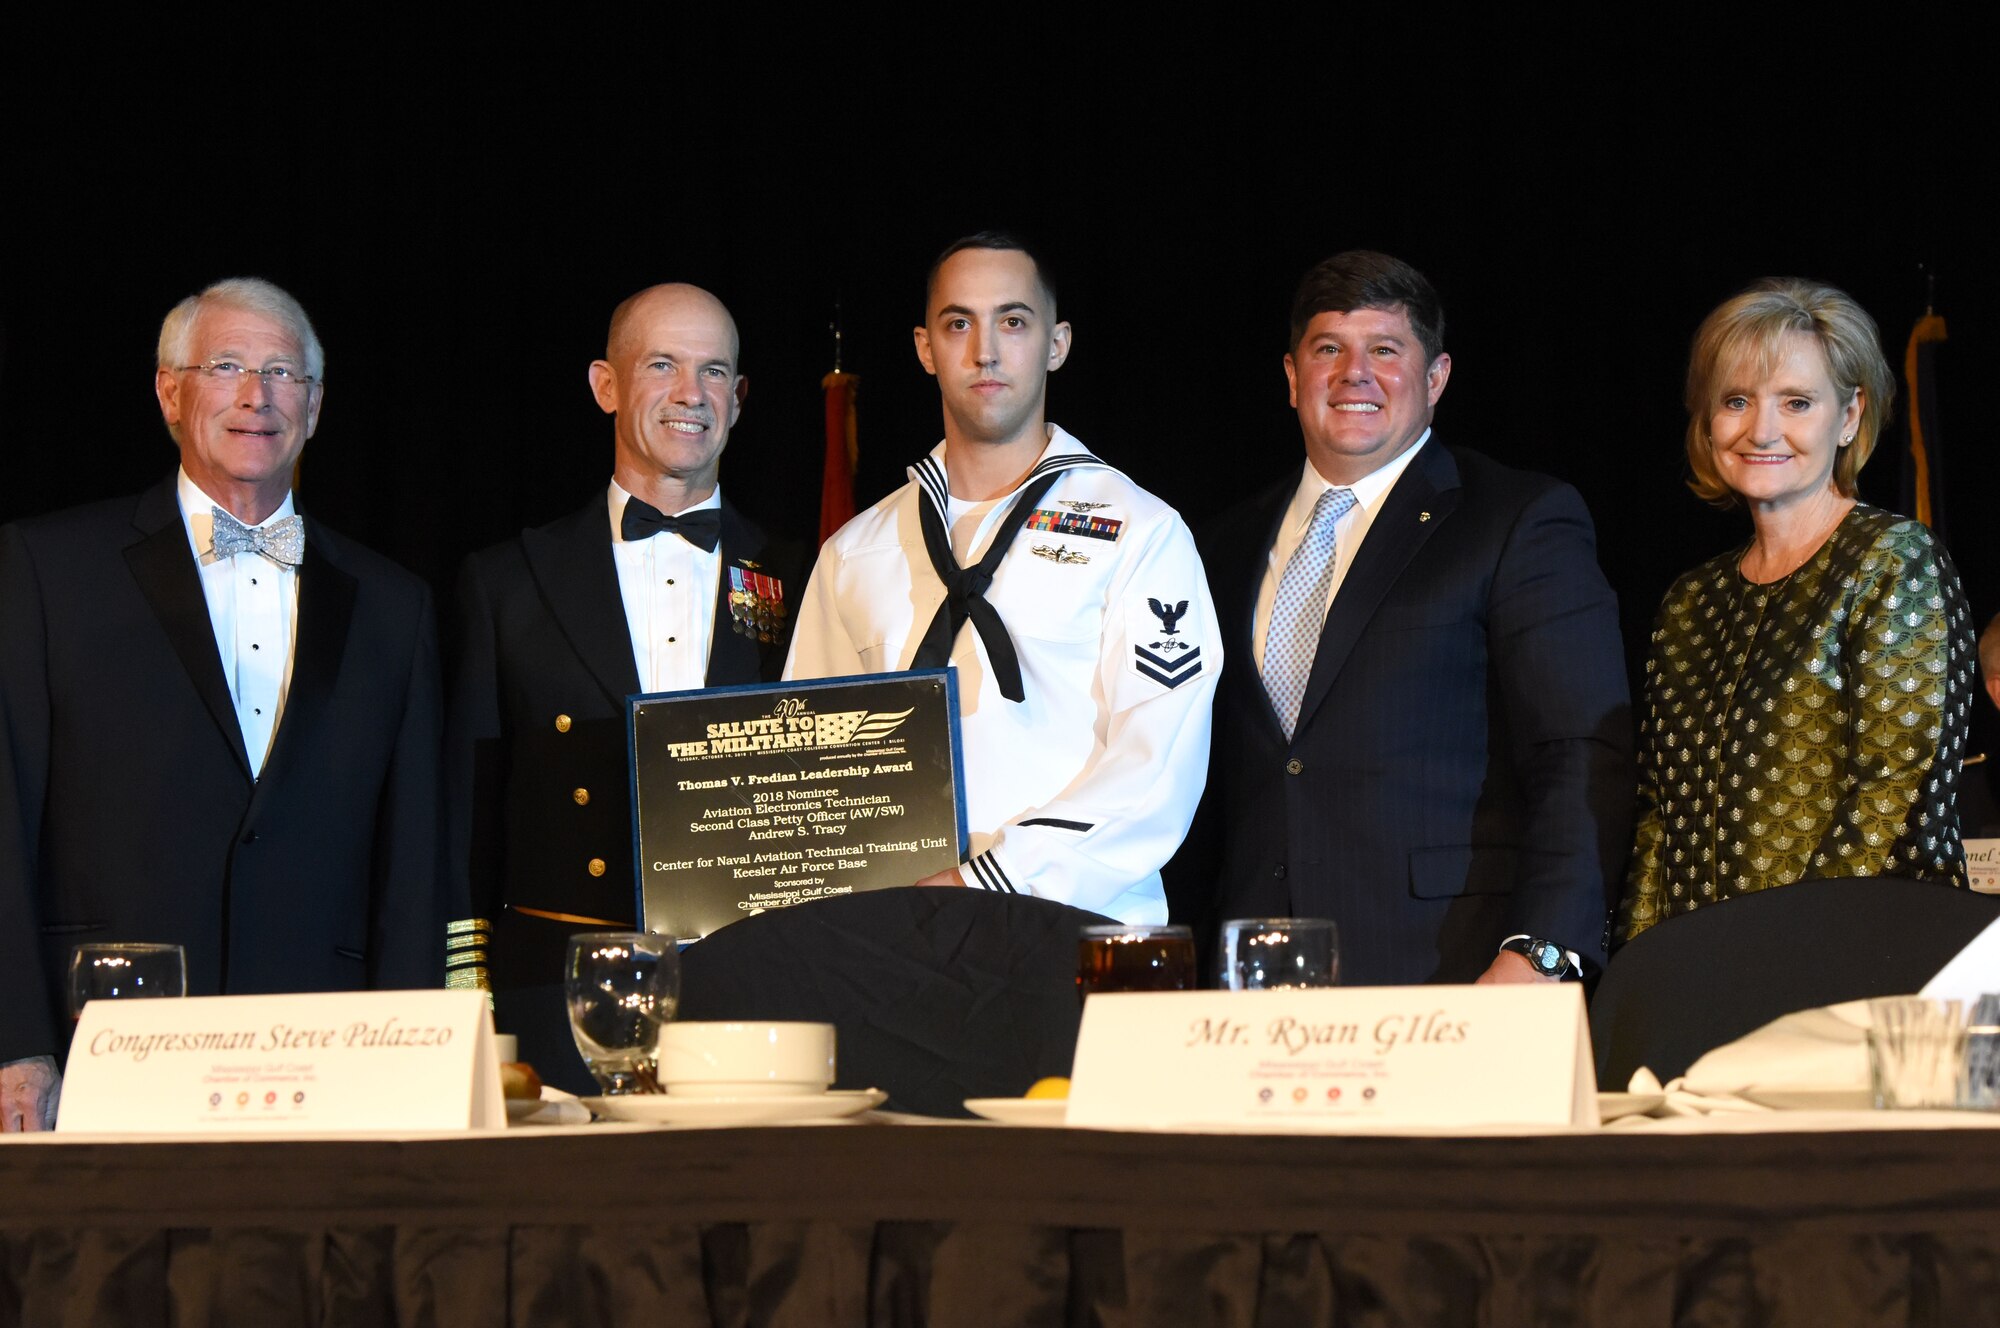 U.S. Navy Aviation Electronics Technician 2nd Class Andrew Tracy, Center for Naval Aviation Technical Training Unit Keesler instructor, receives the Thomas V. Fredian Community Leadership Award from members of the head table during the 40th Annual Salute to the Military inside the Mississippi Coast Convention Center, in Biloxi, Mississippi, Oct. 16, 2018. The Salute to the Military event recognized the men and women who serve in the military along the Gulf Coast. (U.S. Air Force photo by Kemberly Groue)